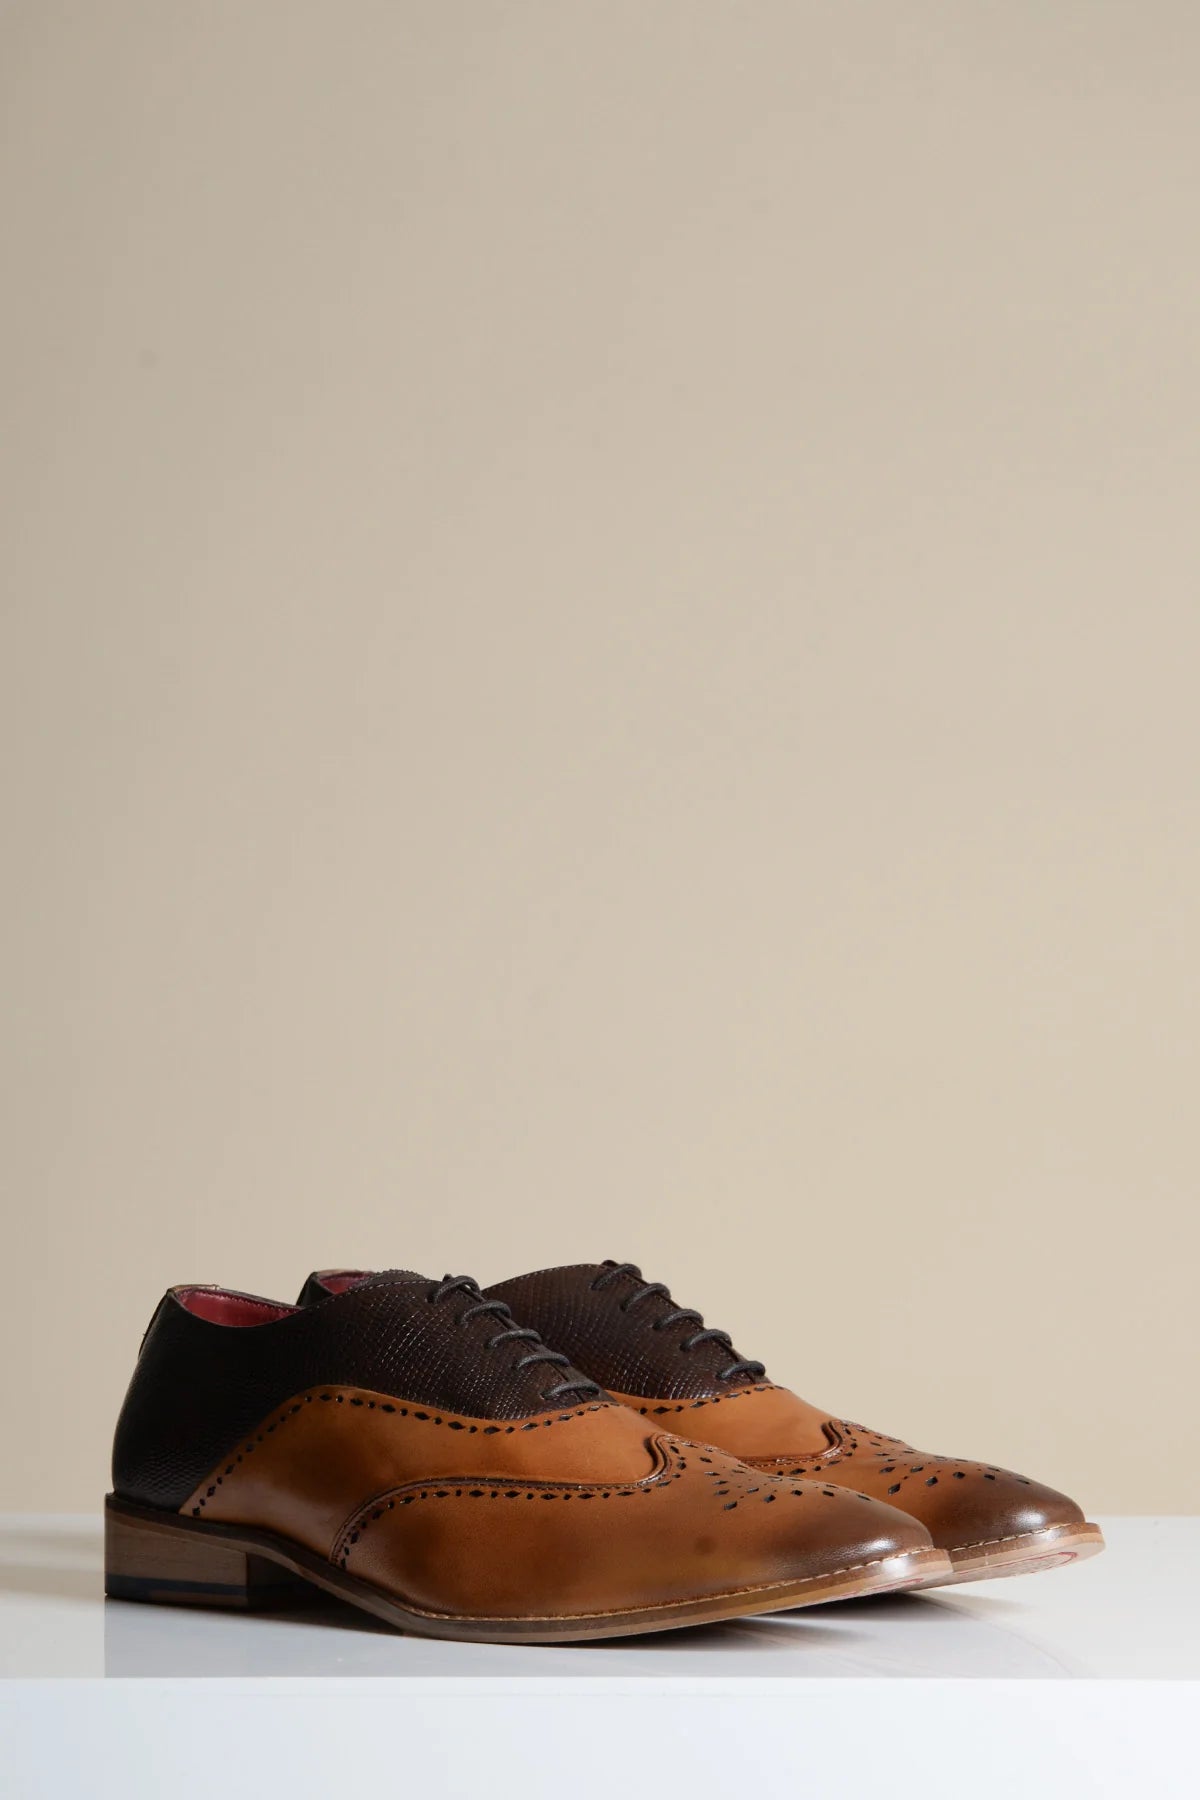 Brown leather shoes, Marc Darcy Ryan - Wingtip brogue